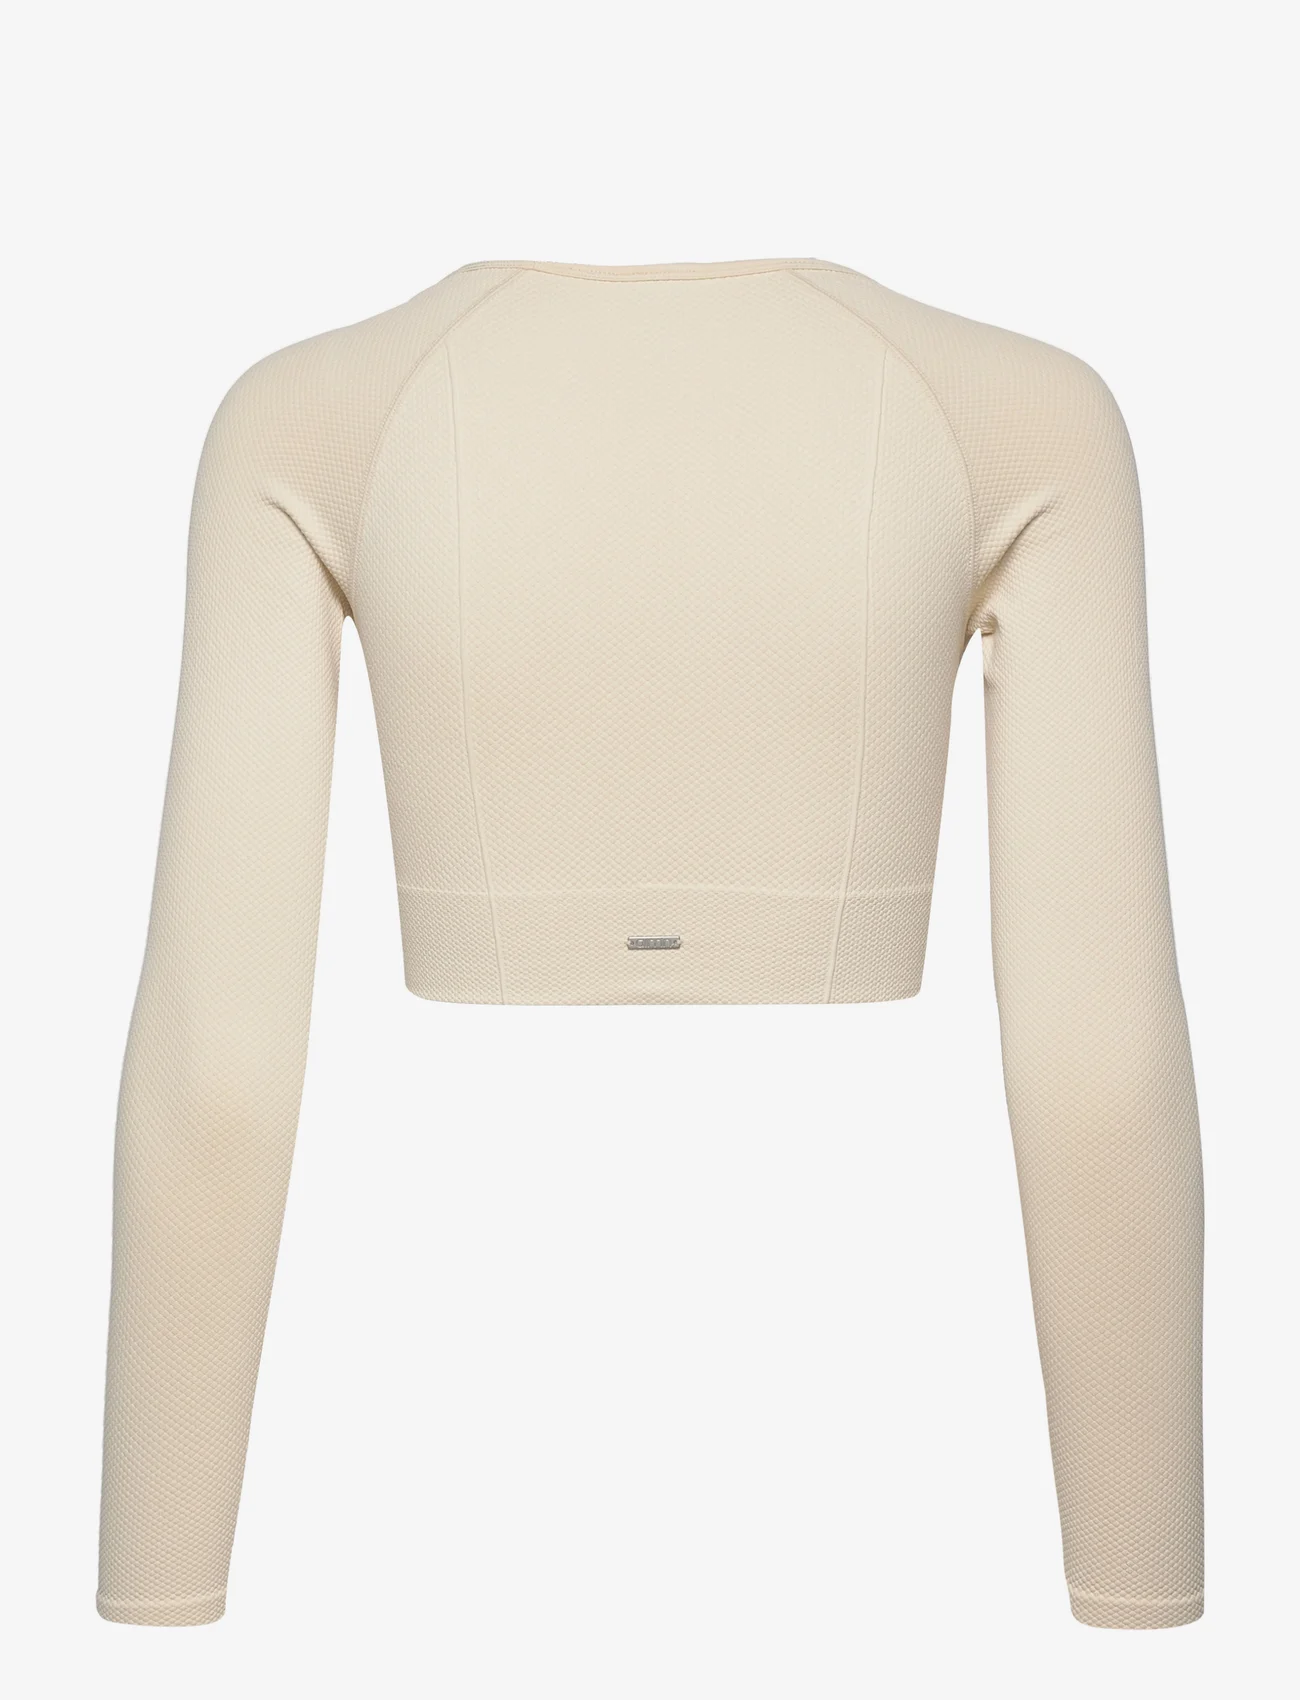 AIM'N - Luxe Seamless Cropped Long Sleeve - pitkähihaiset topit - oat white - 1